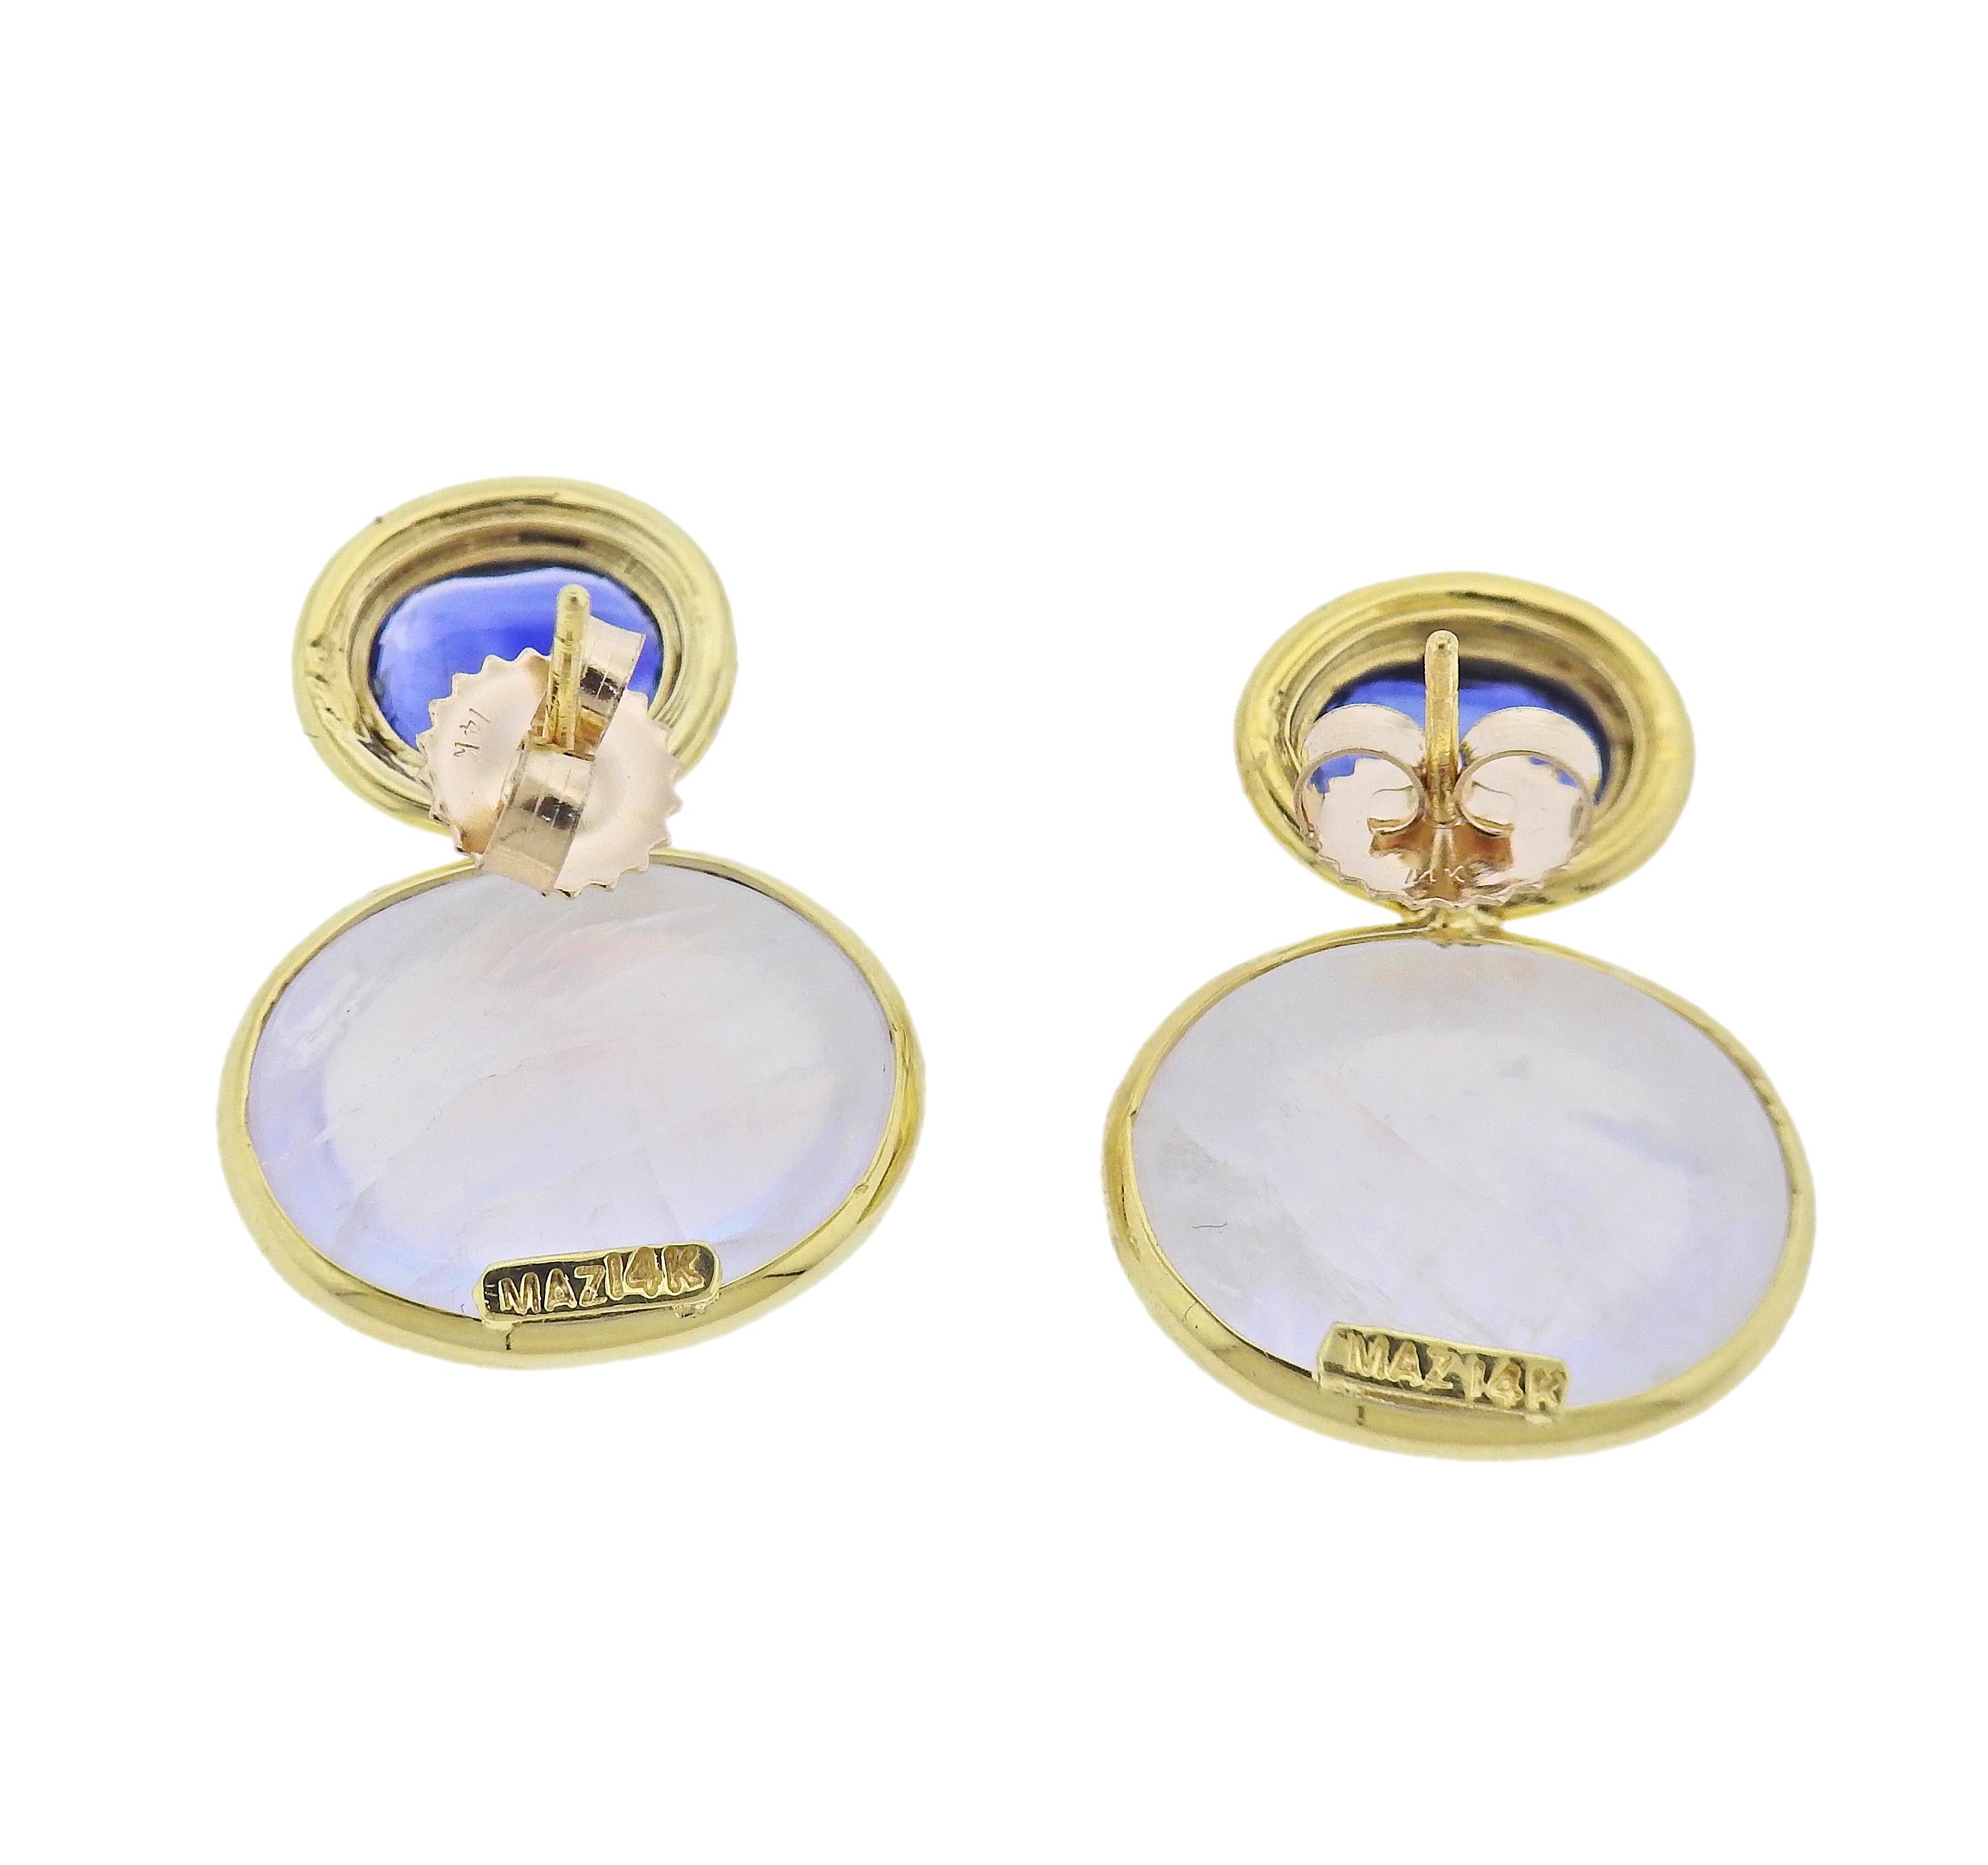 Brand new 14k gold Maz earrings with moonstones and sapphires. Earrings are 23mm x 18mm. Marked: MAZ, 14k.. Weight - 9 grams.